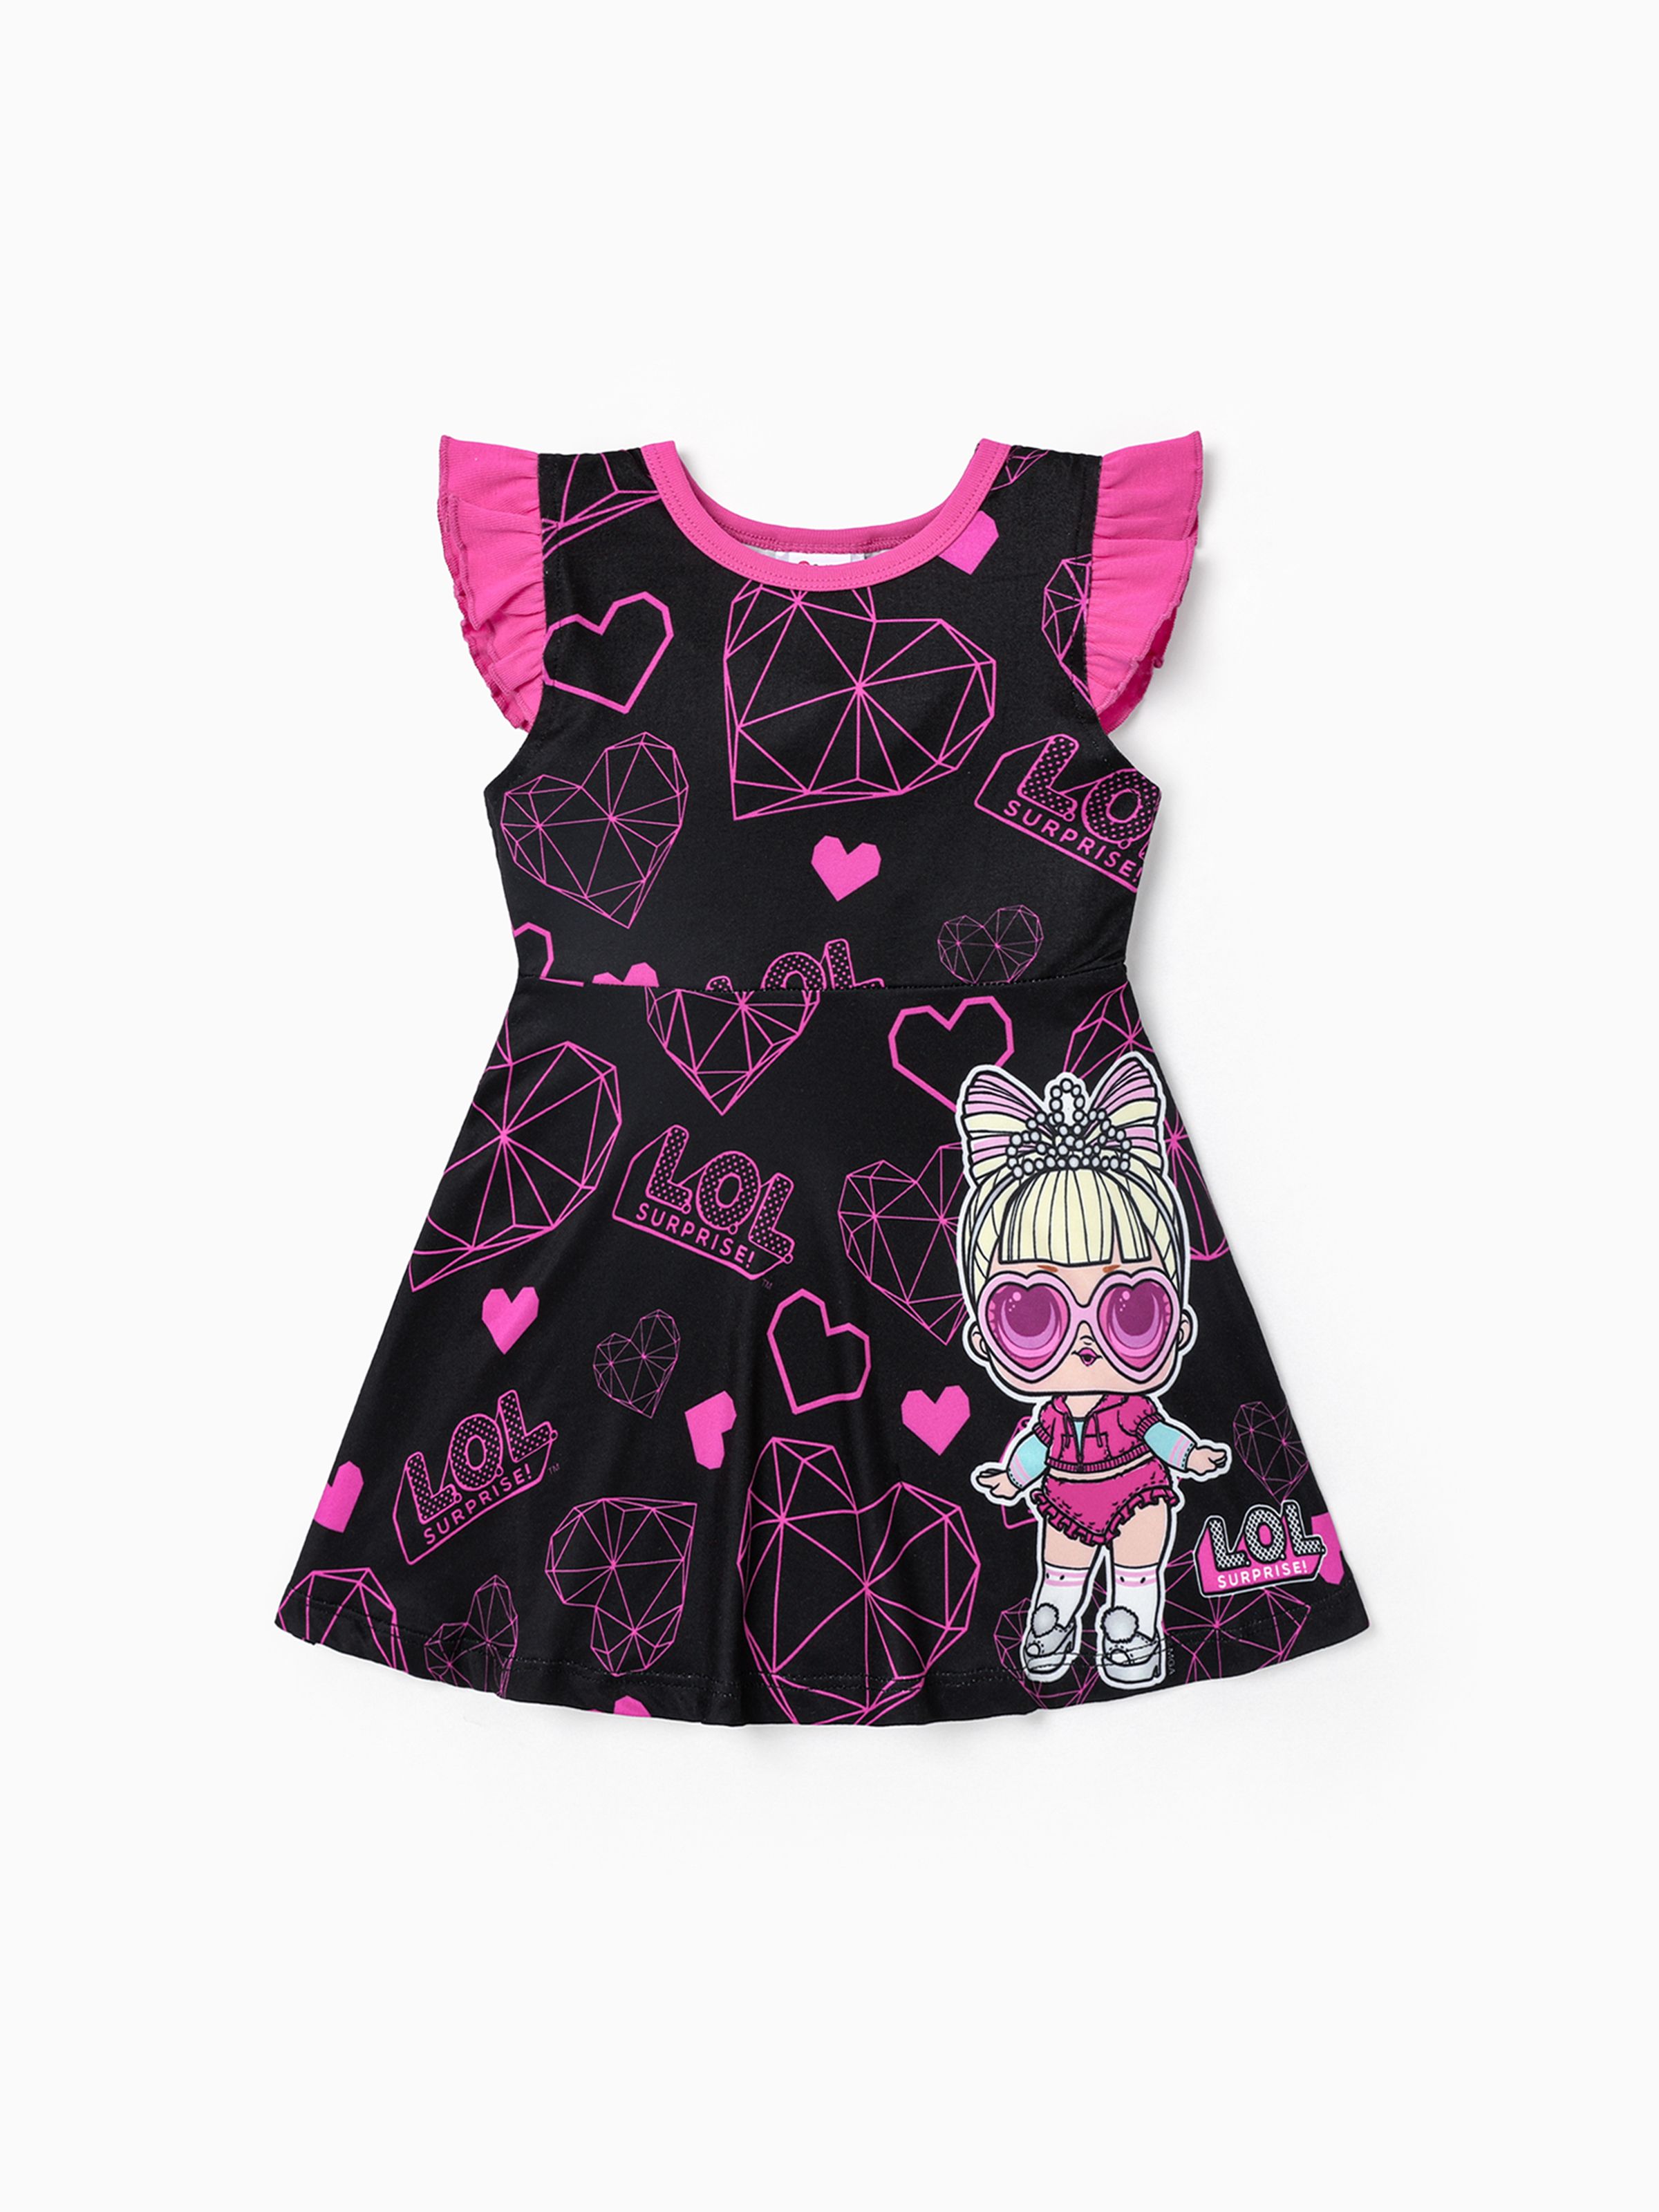 

L.O.L. SURPRISE! Toddler Girls Mother's Day 1pc Graphic Print Little Flying Sleeve Dress